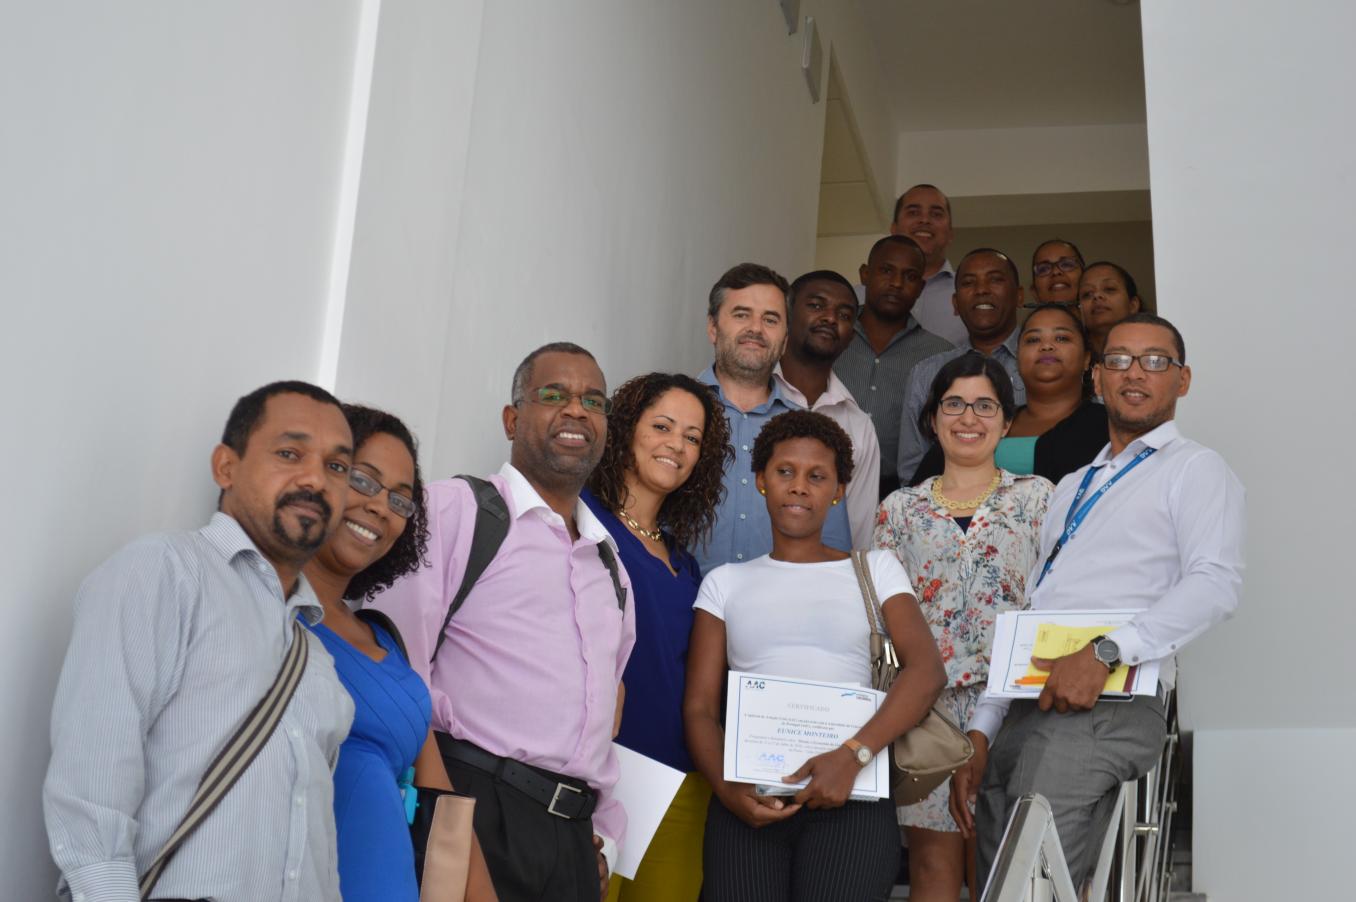 2016 — On July 11 and 12, a Training Course in Competition Law and Economics was held in Cidade da Praia, organized by the Cape Verde Civil Aviation Agency (AAC), with participants from various sectoral agencies.